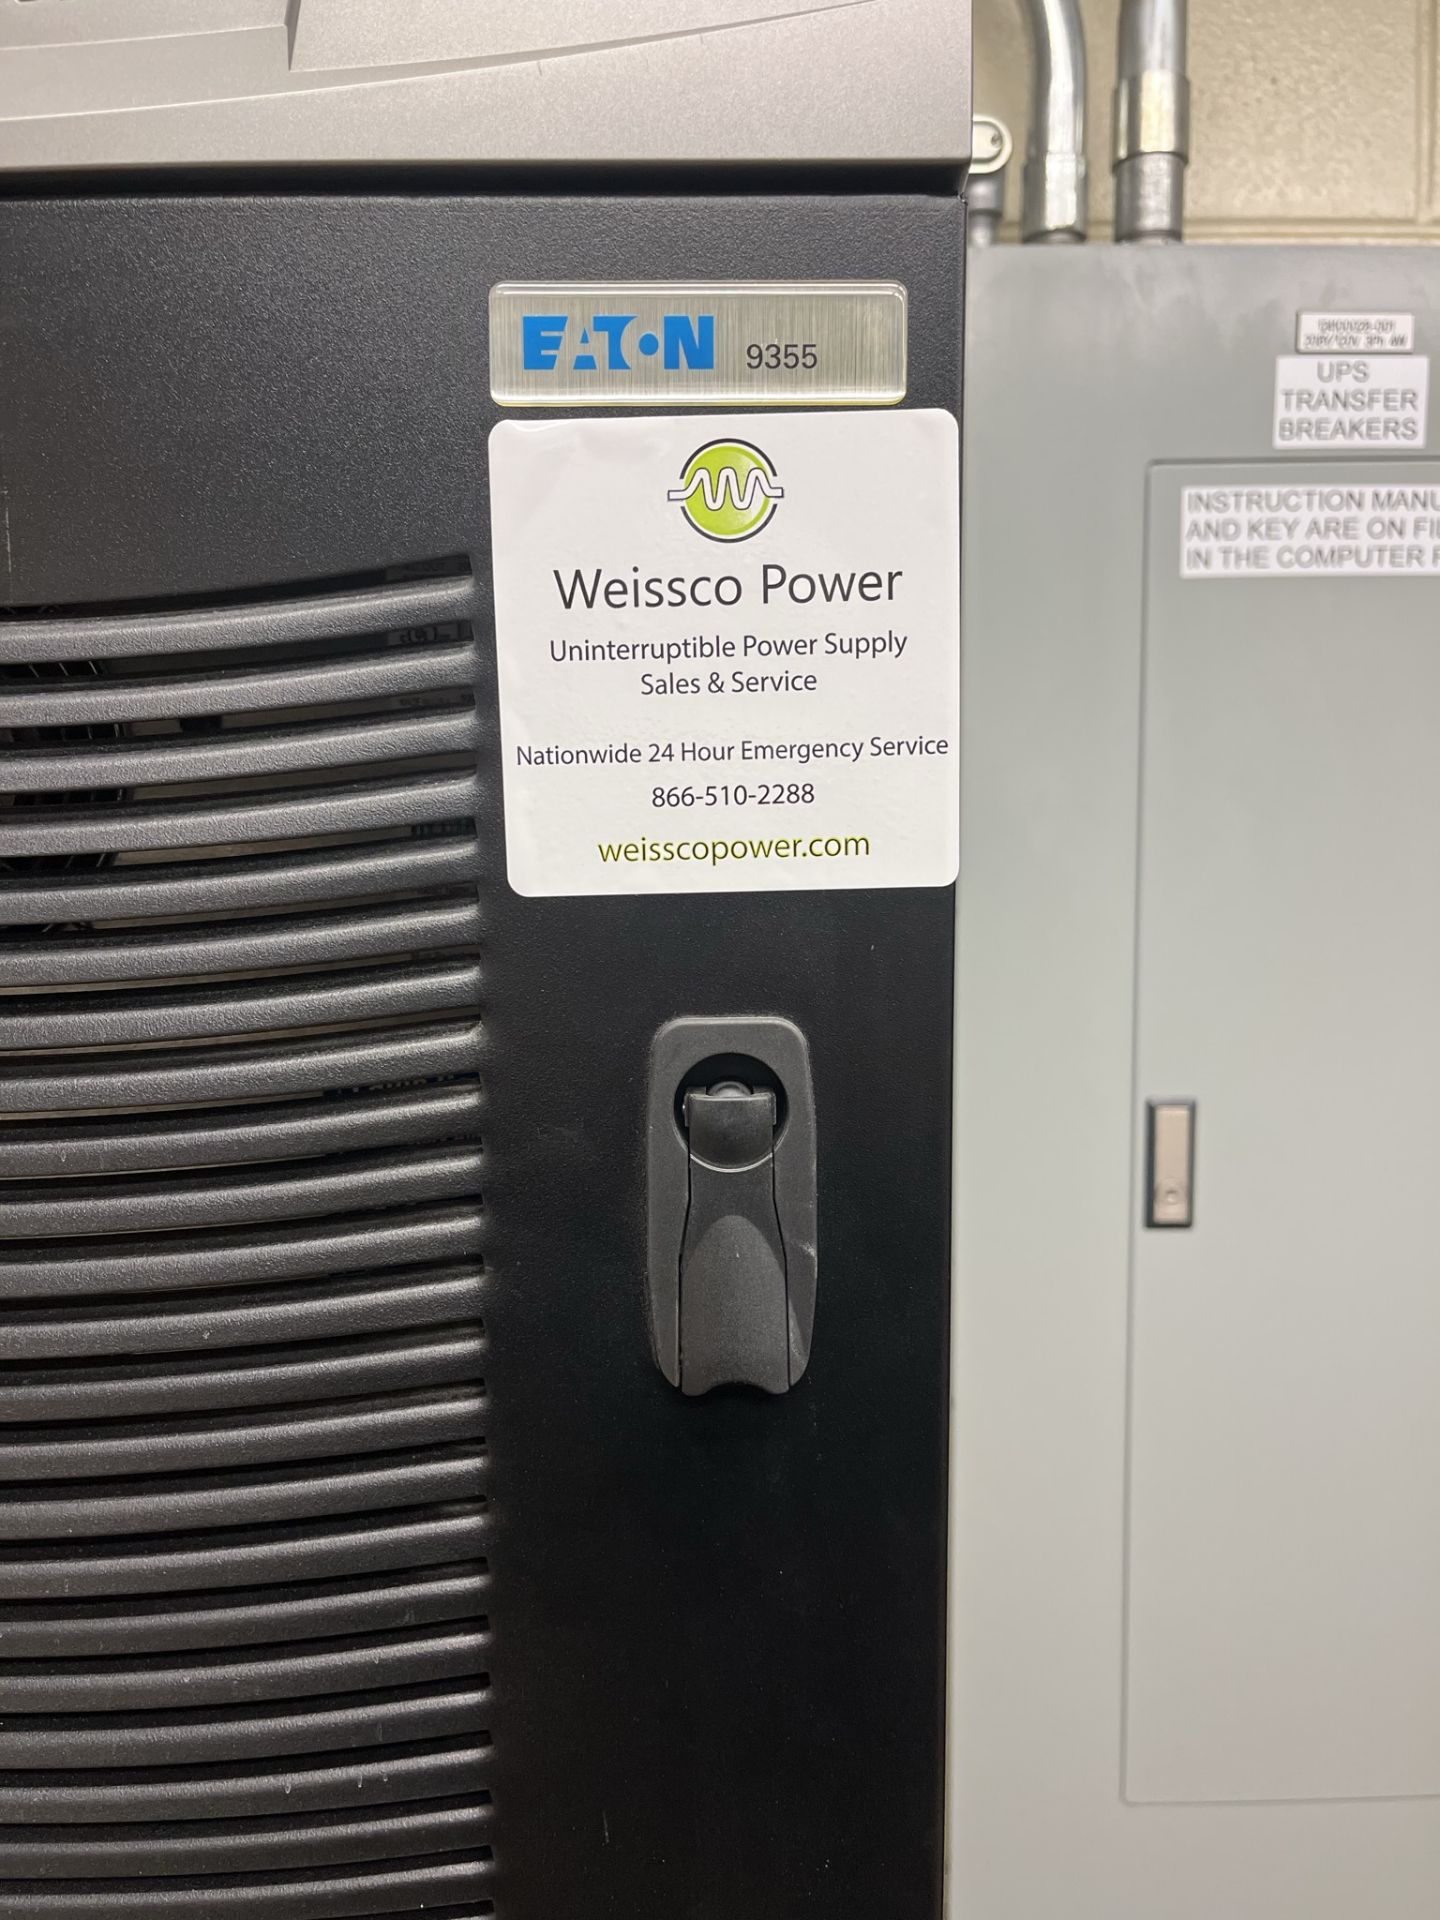 EATON 9355 THREE PHASE DOUBLE-CONVERSION TOWER ONLINE UPS PROVIDES A COMPLETE POWER PROTECTION - Image 4 of 8